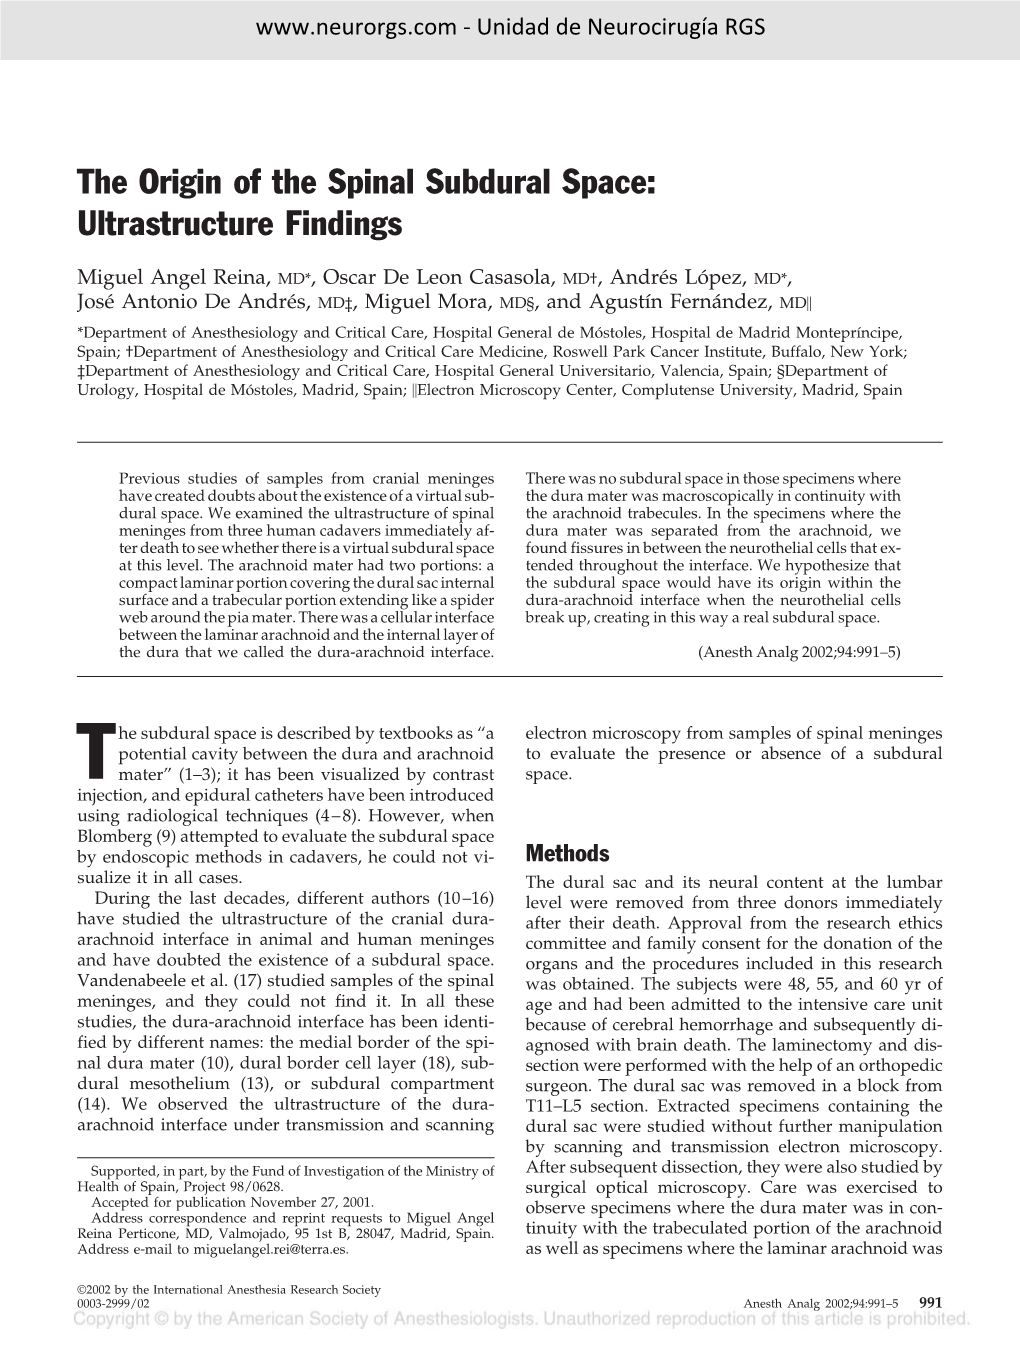 The Origin of the Spinal Subdural Space: Ultrastructure Findings